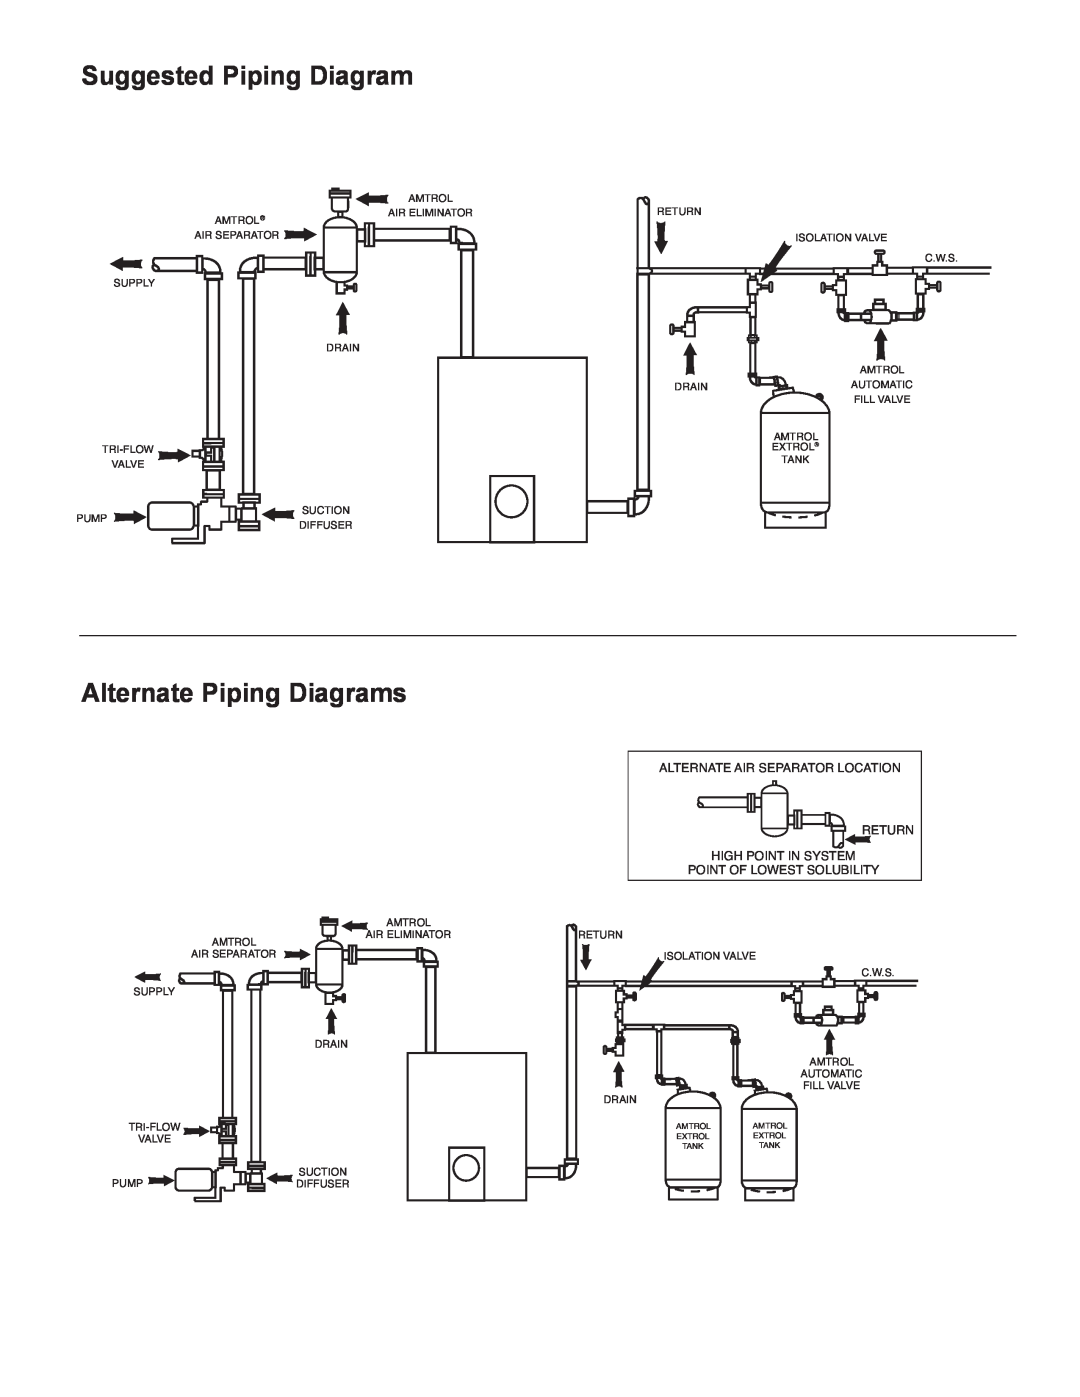 Amtrol 35-LBC, 600-LBC warranty Suggested Piping Diagram, Alternate Piping Diagrams, Point Of Lowest Solubility 